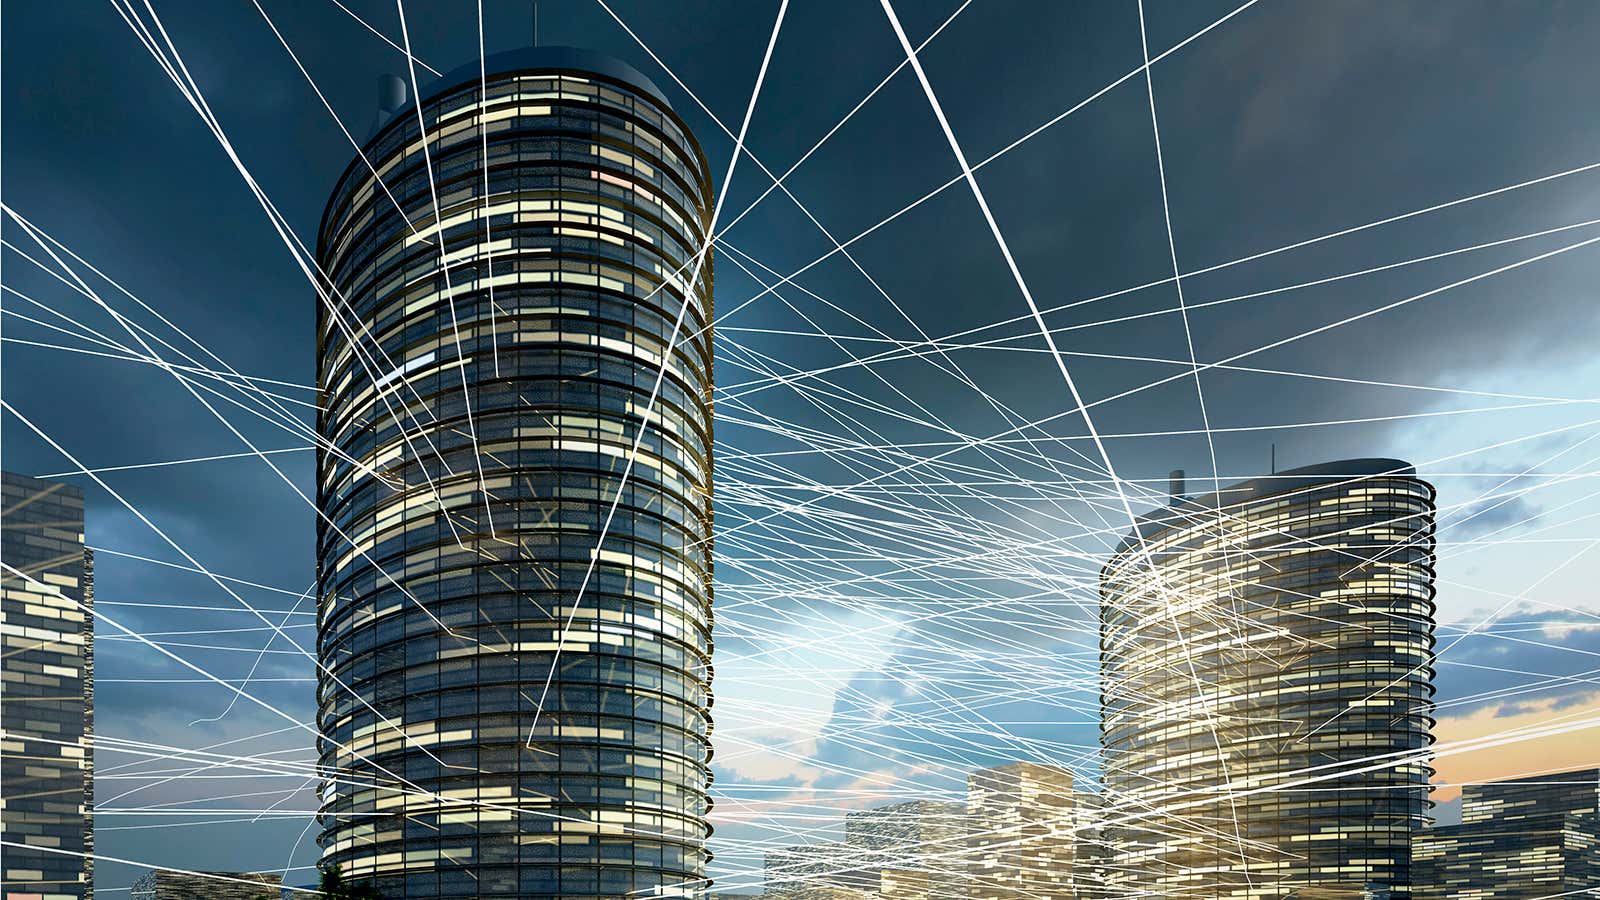 office towers with light beams visualizing communication flow — Image by © Volker Mˆhrke/Corbis